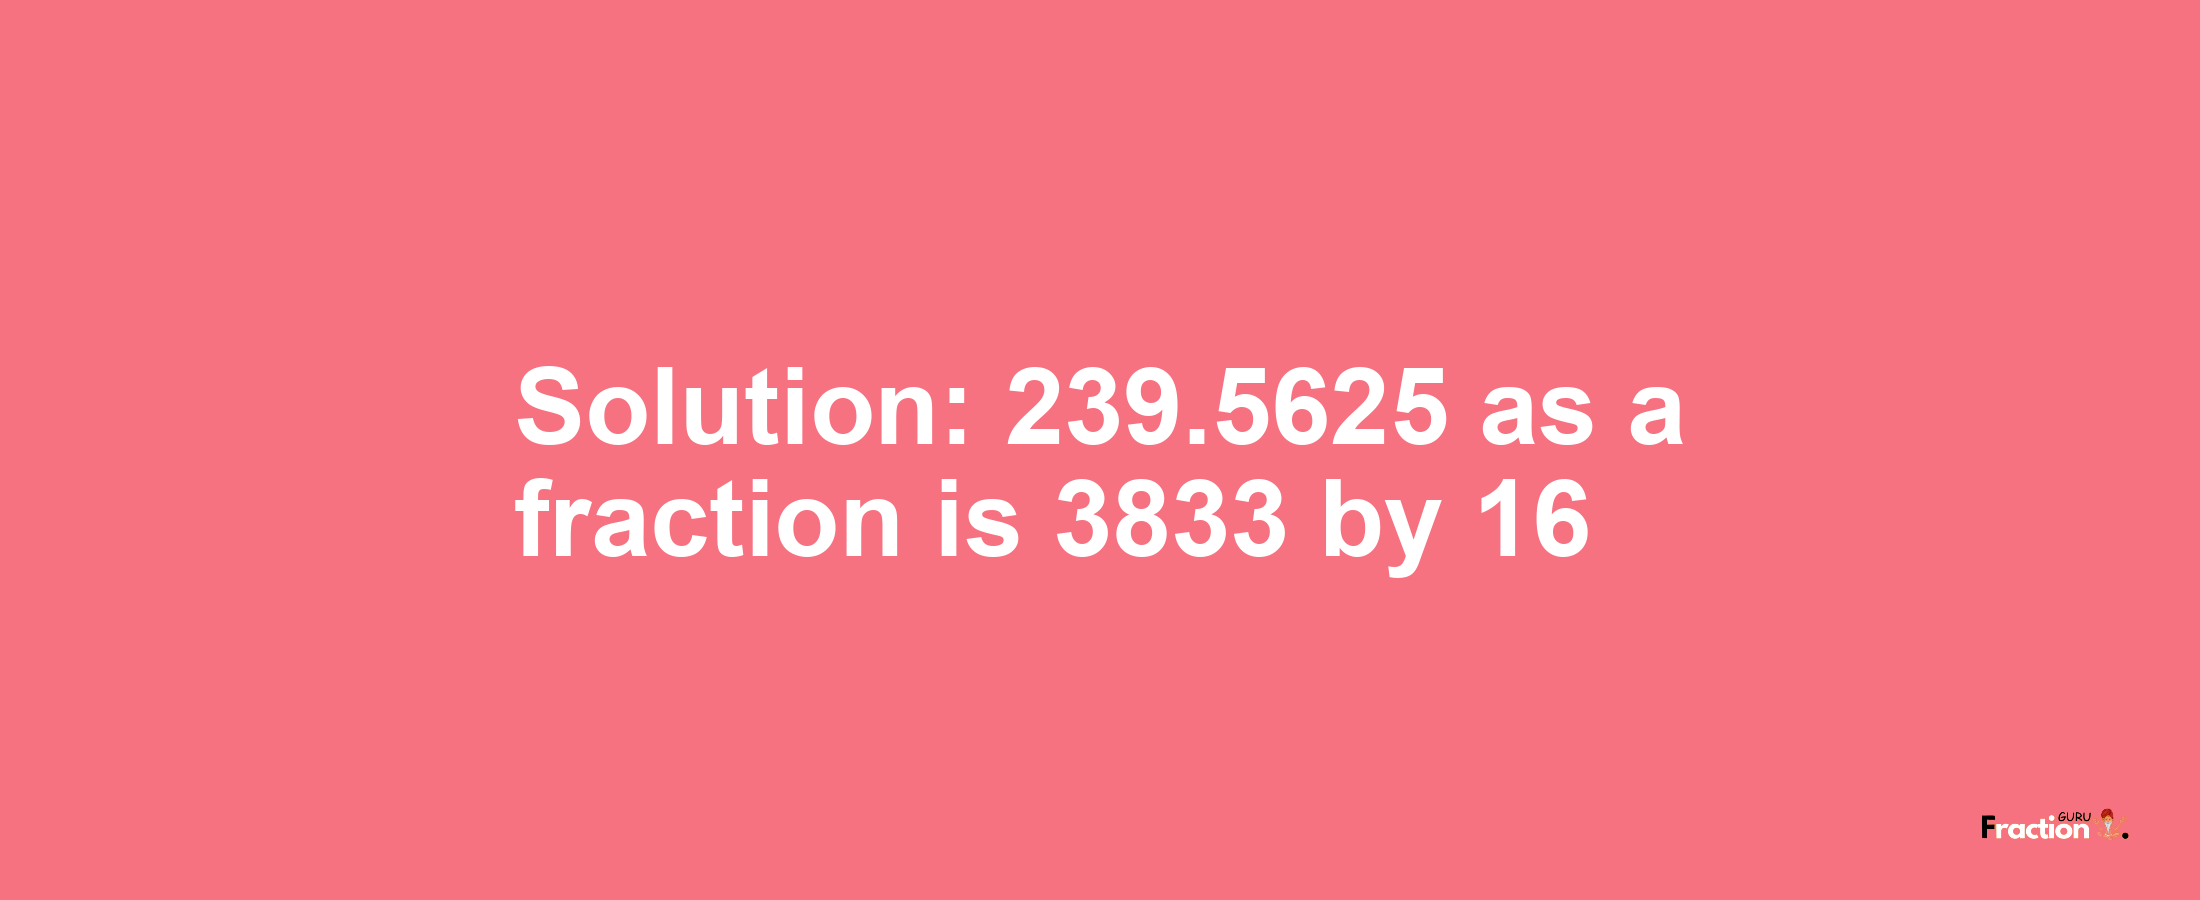 Solution:239.5625 as a fraction is 3833/16